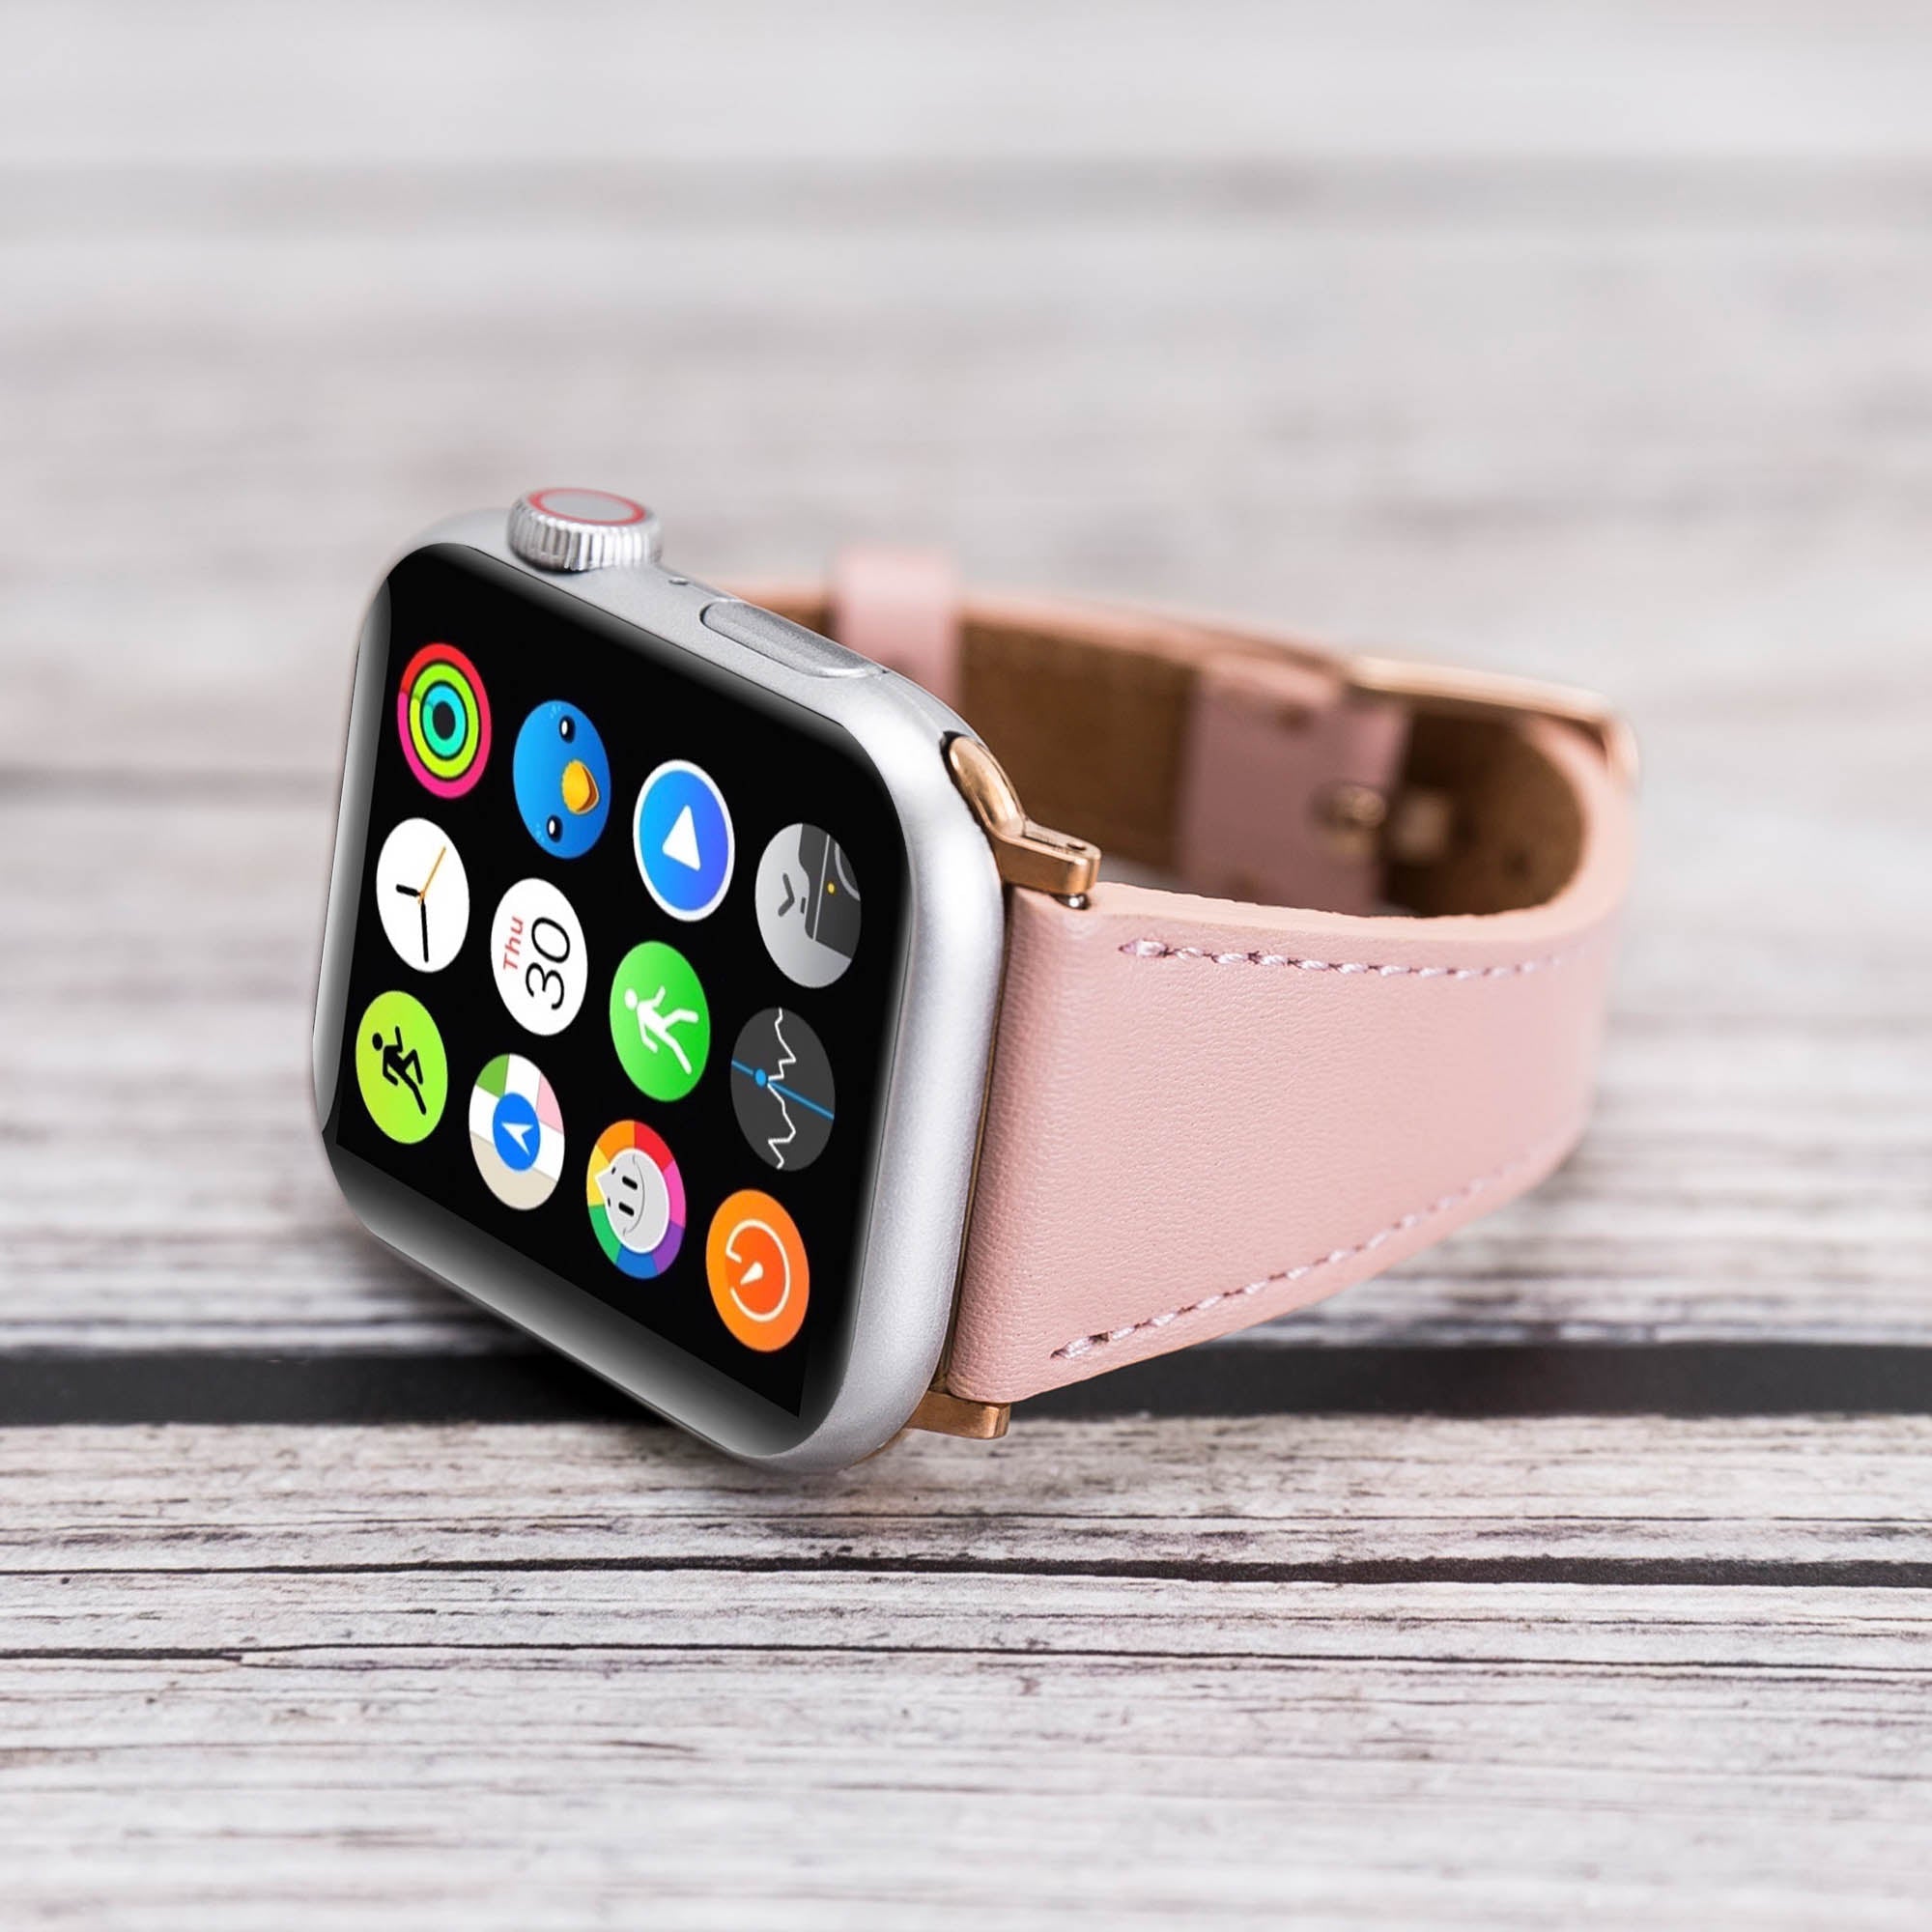 Slim Strap - Full Grain Leather Band for Apple Watch 38mm / 40mm - PINK - saracleather